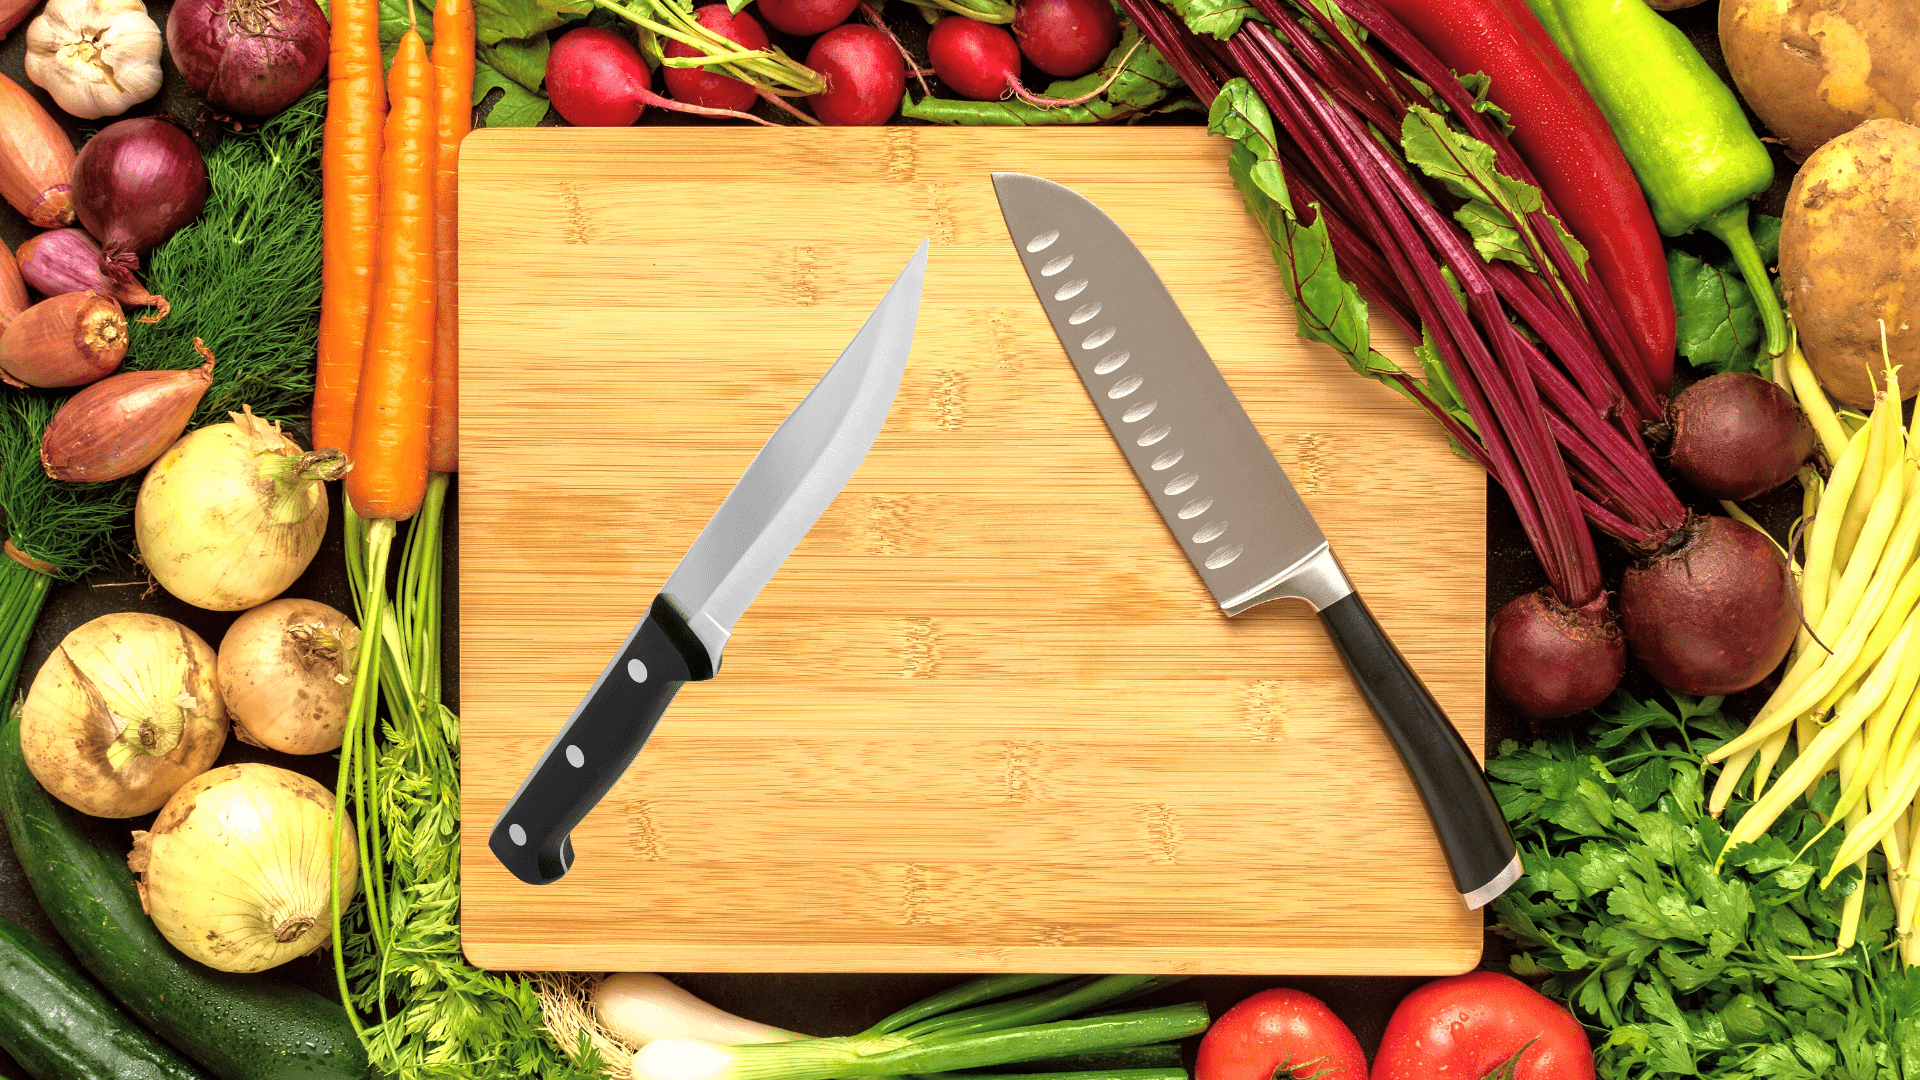 Bunka vs santoku knives | How they compare [& which to buy]